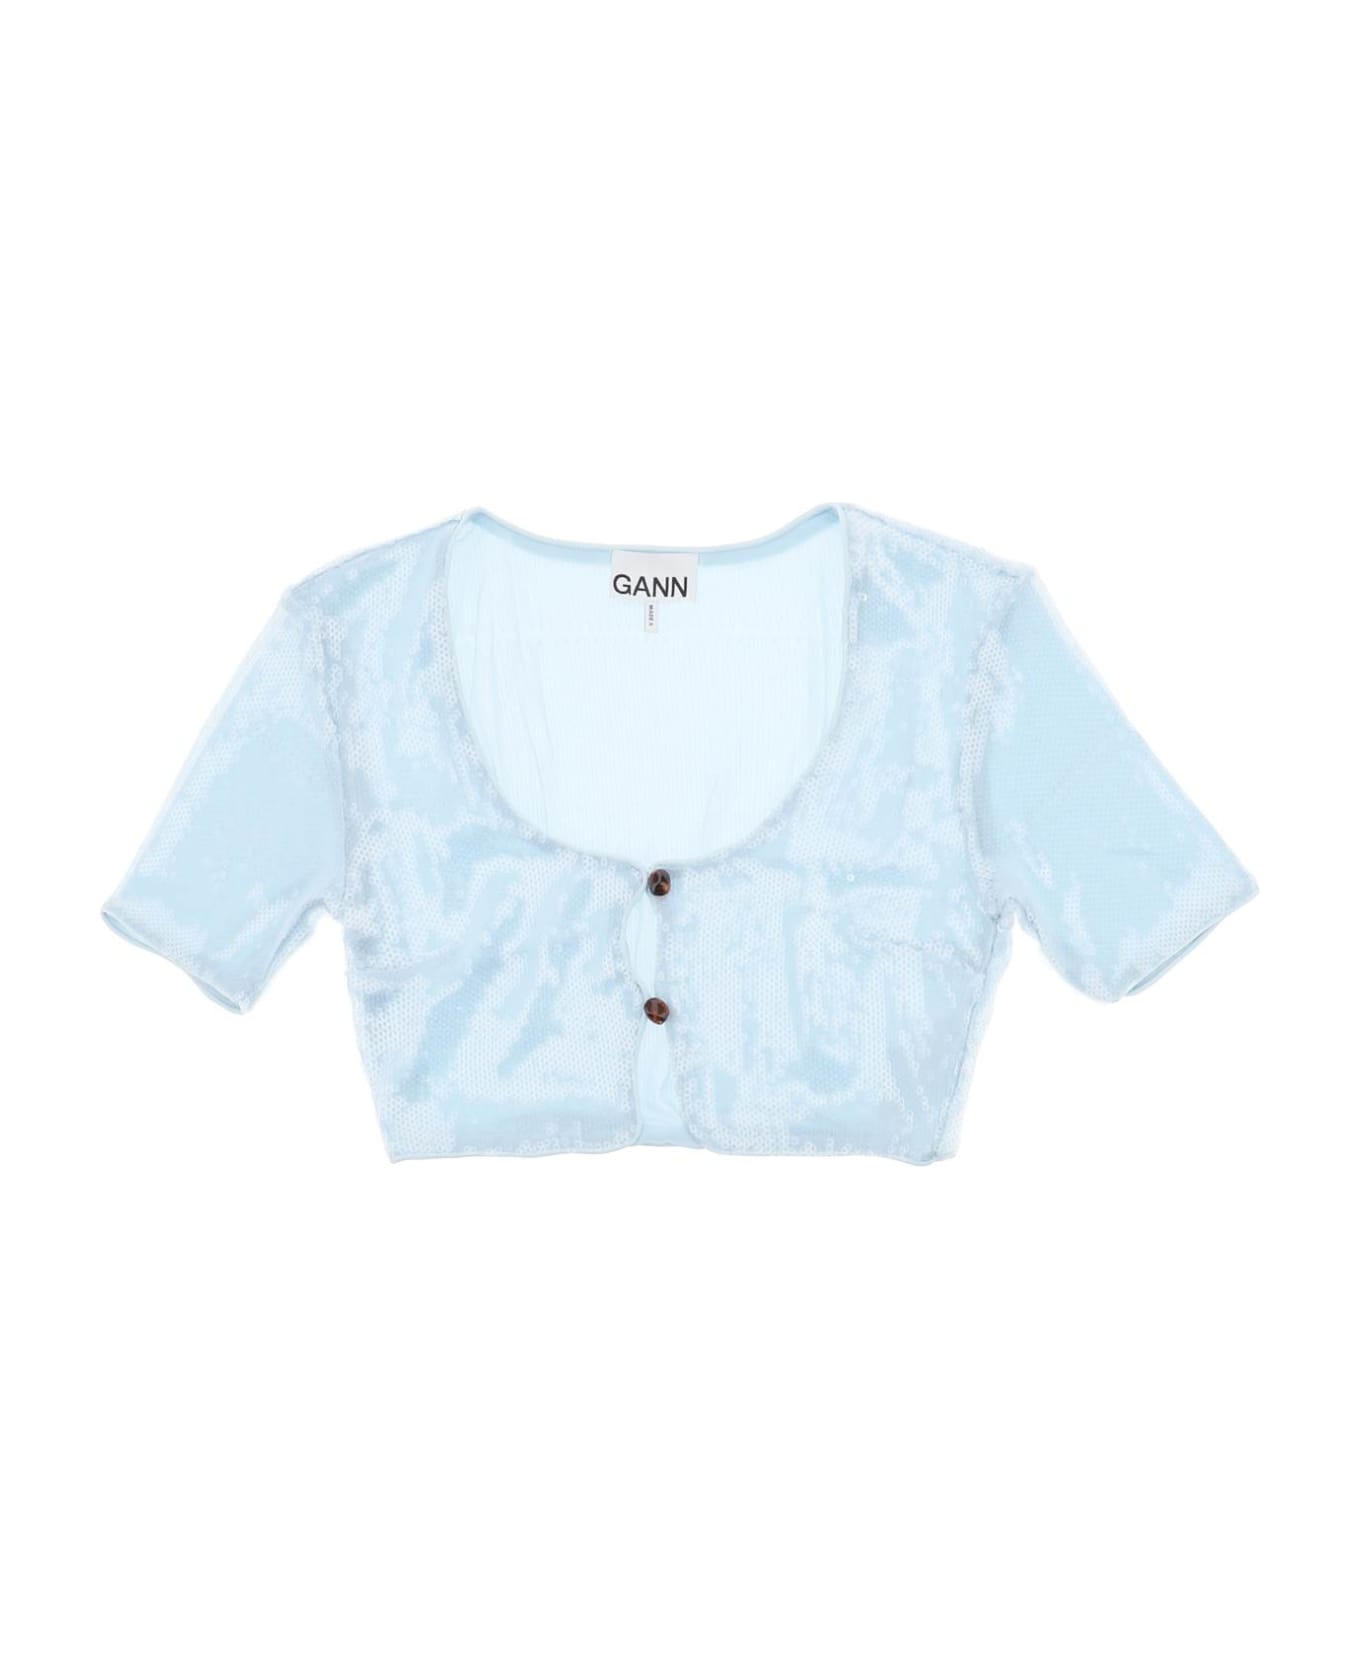 Ganni Sequin Cropped Top - ICE WATER (Light blue) トップス